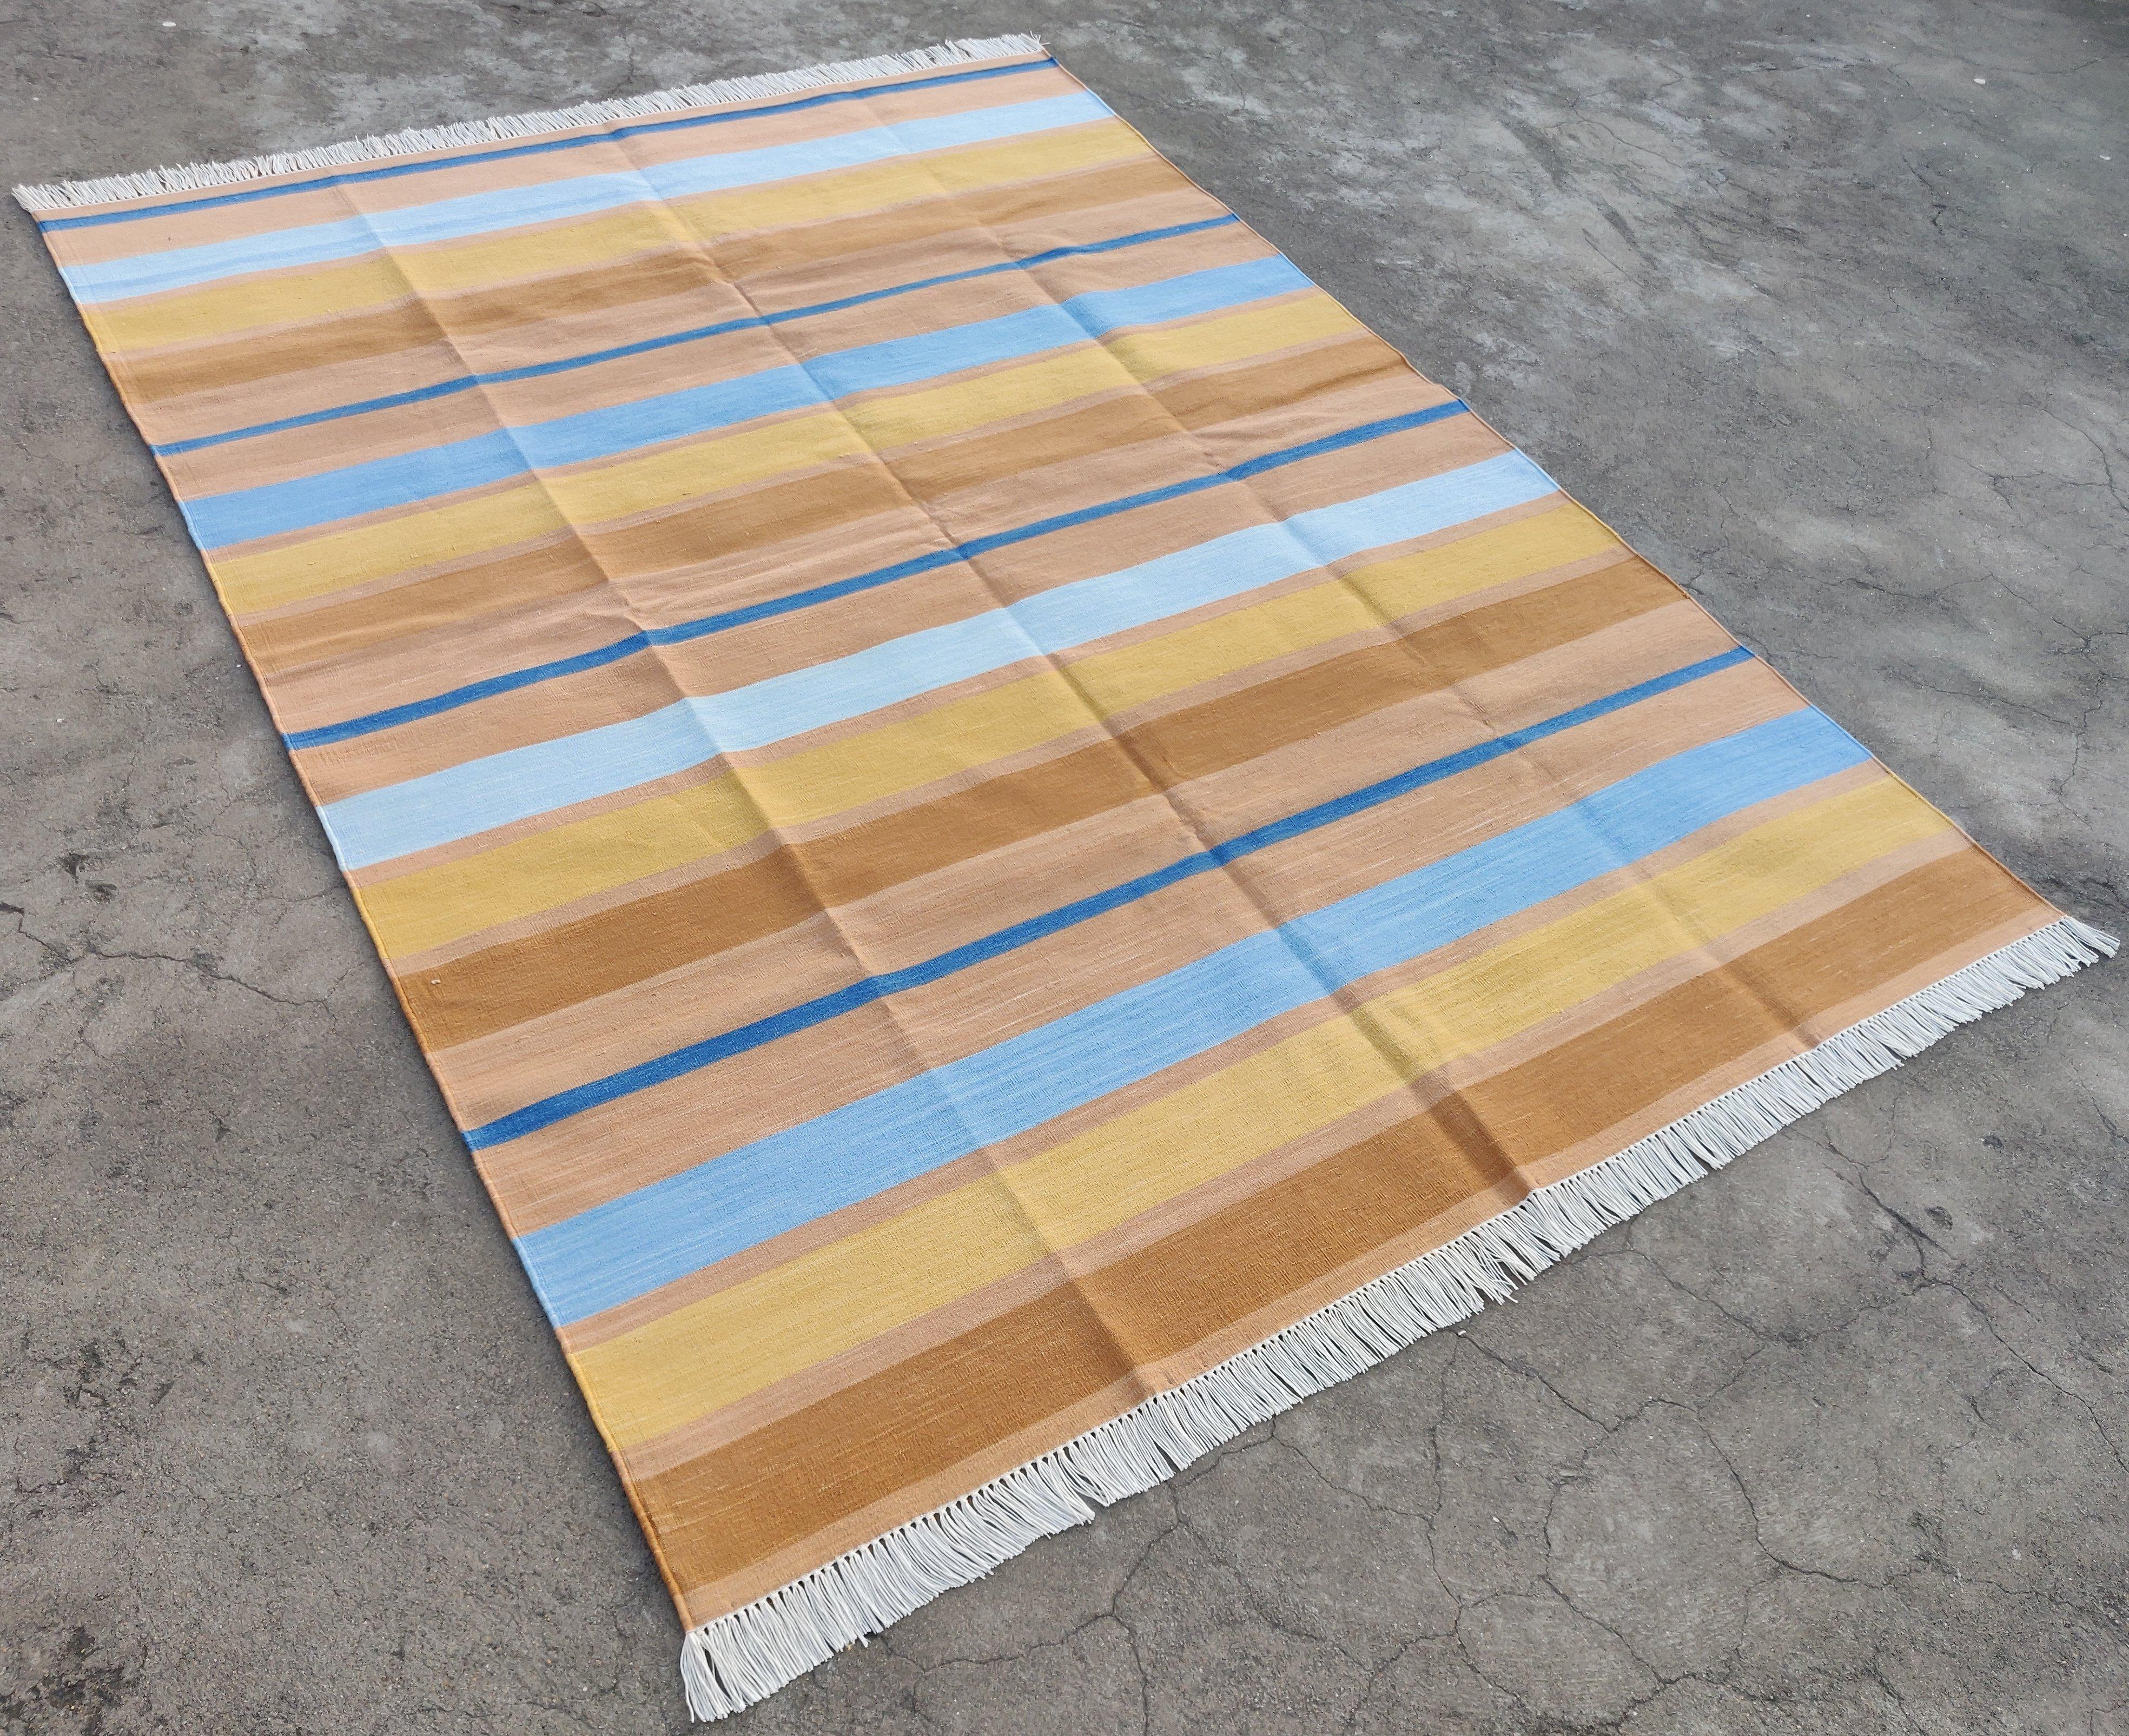 Cotton Vegetable Dyed Tan And Blue Striped Indian Dhurrie Rug-5'x7'

These special flat-weave dhurries are hand-woven with 15 ply 100% cotton yarn. Due to the special manufacturing techniques used to create our rugs, the size and color of each piece